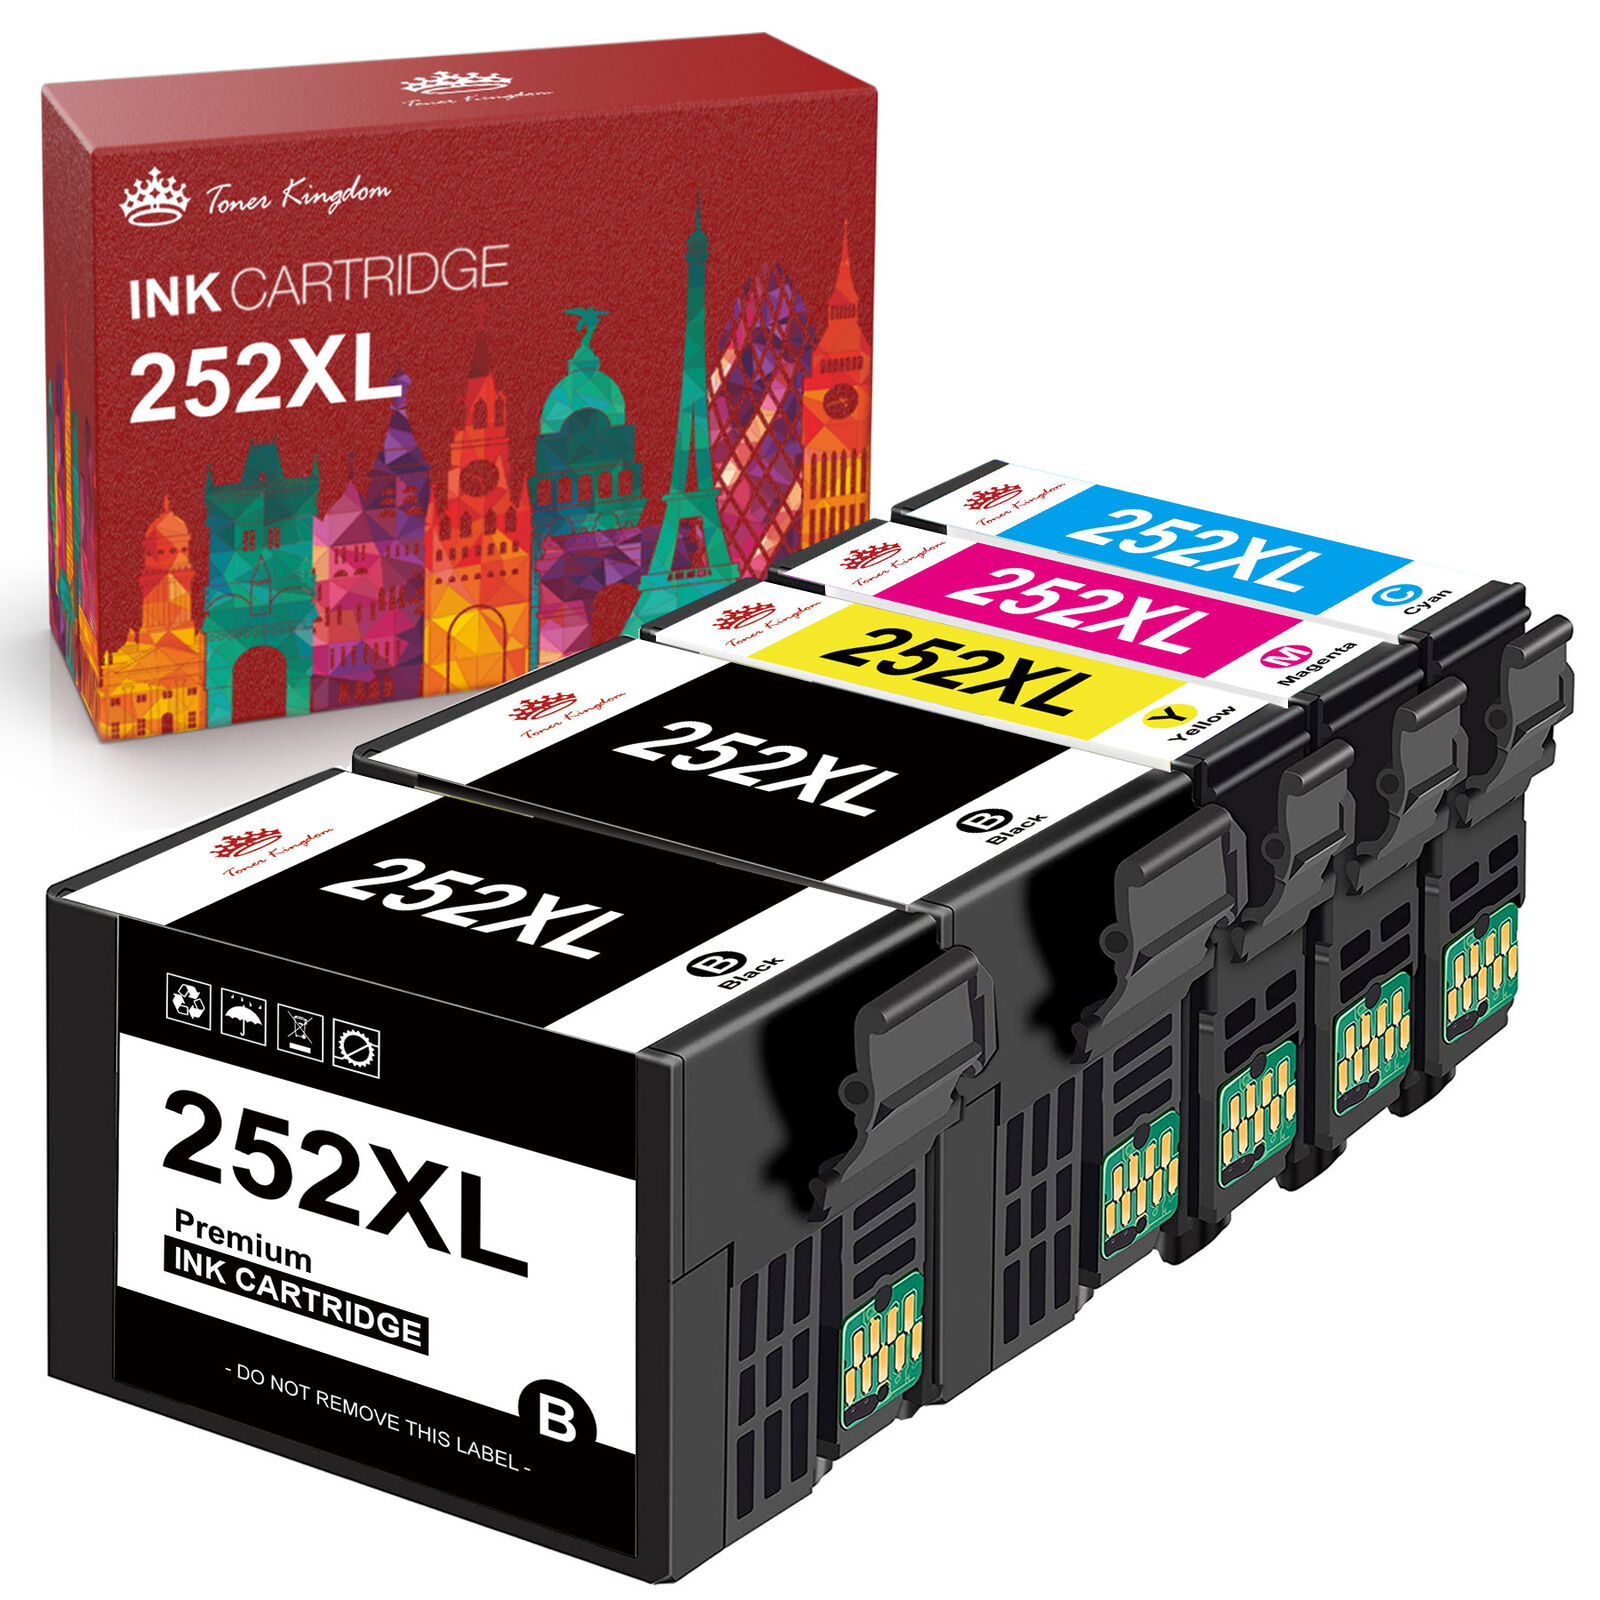 5x 252XL High Yield Ink Replacement For Epson WorkForce WF3620 WF3640 WF7710